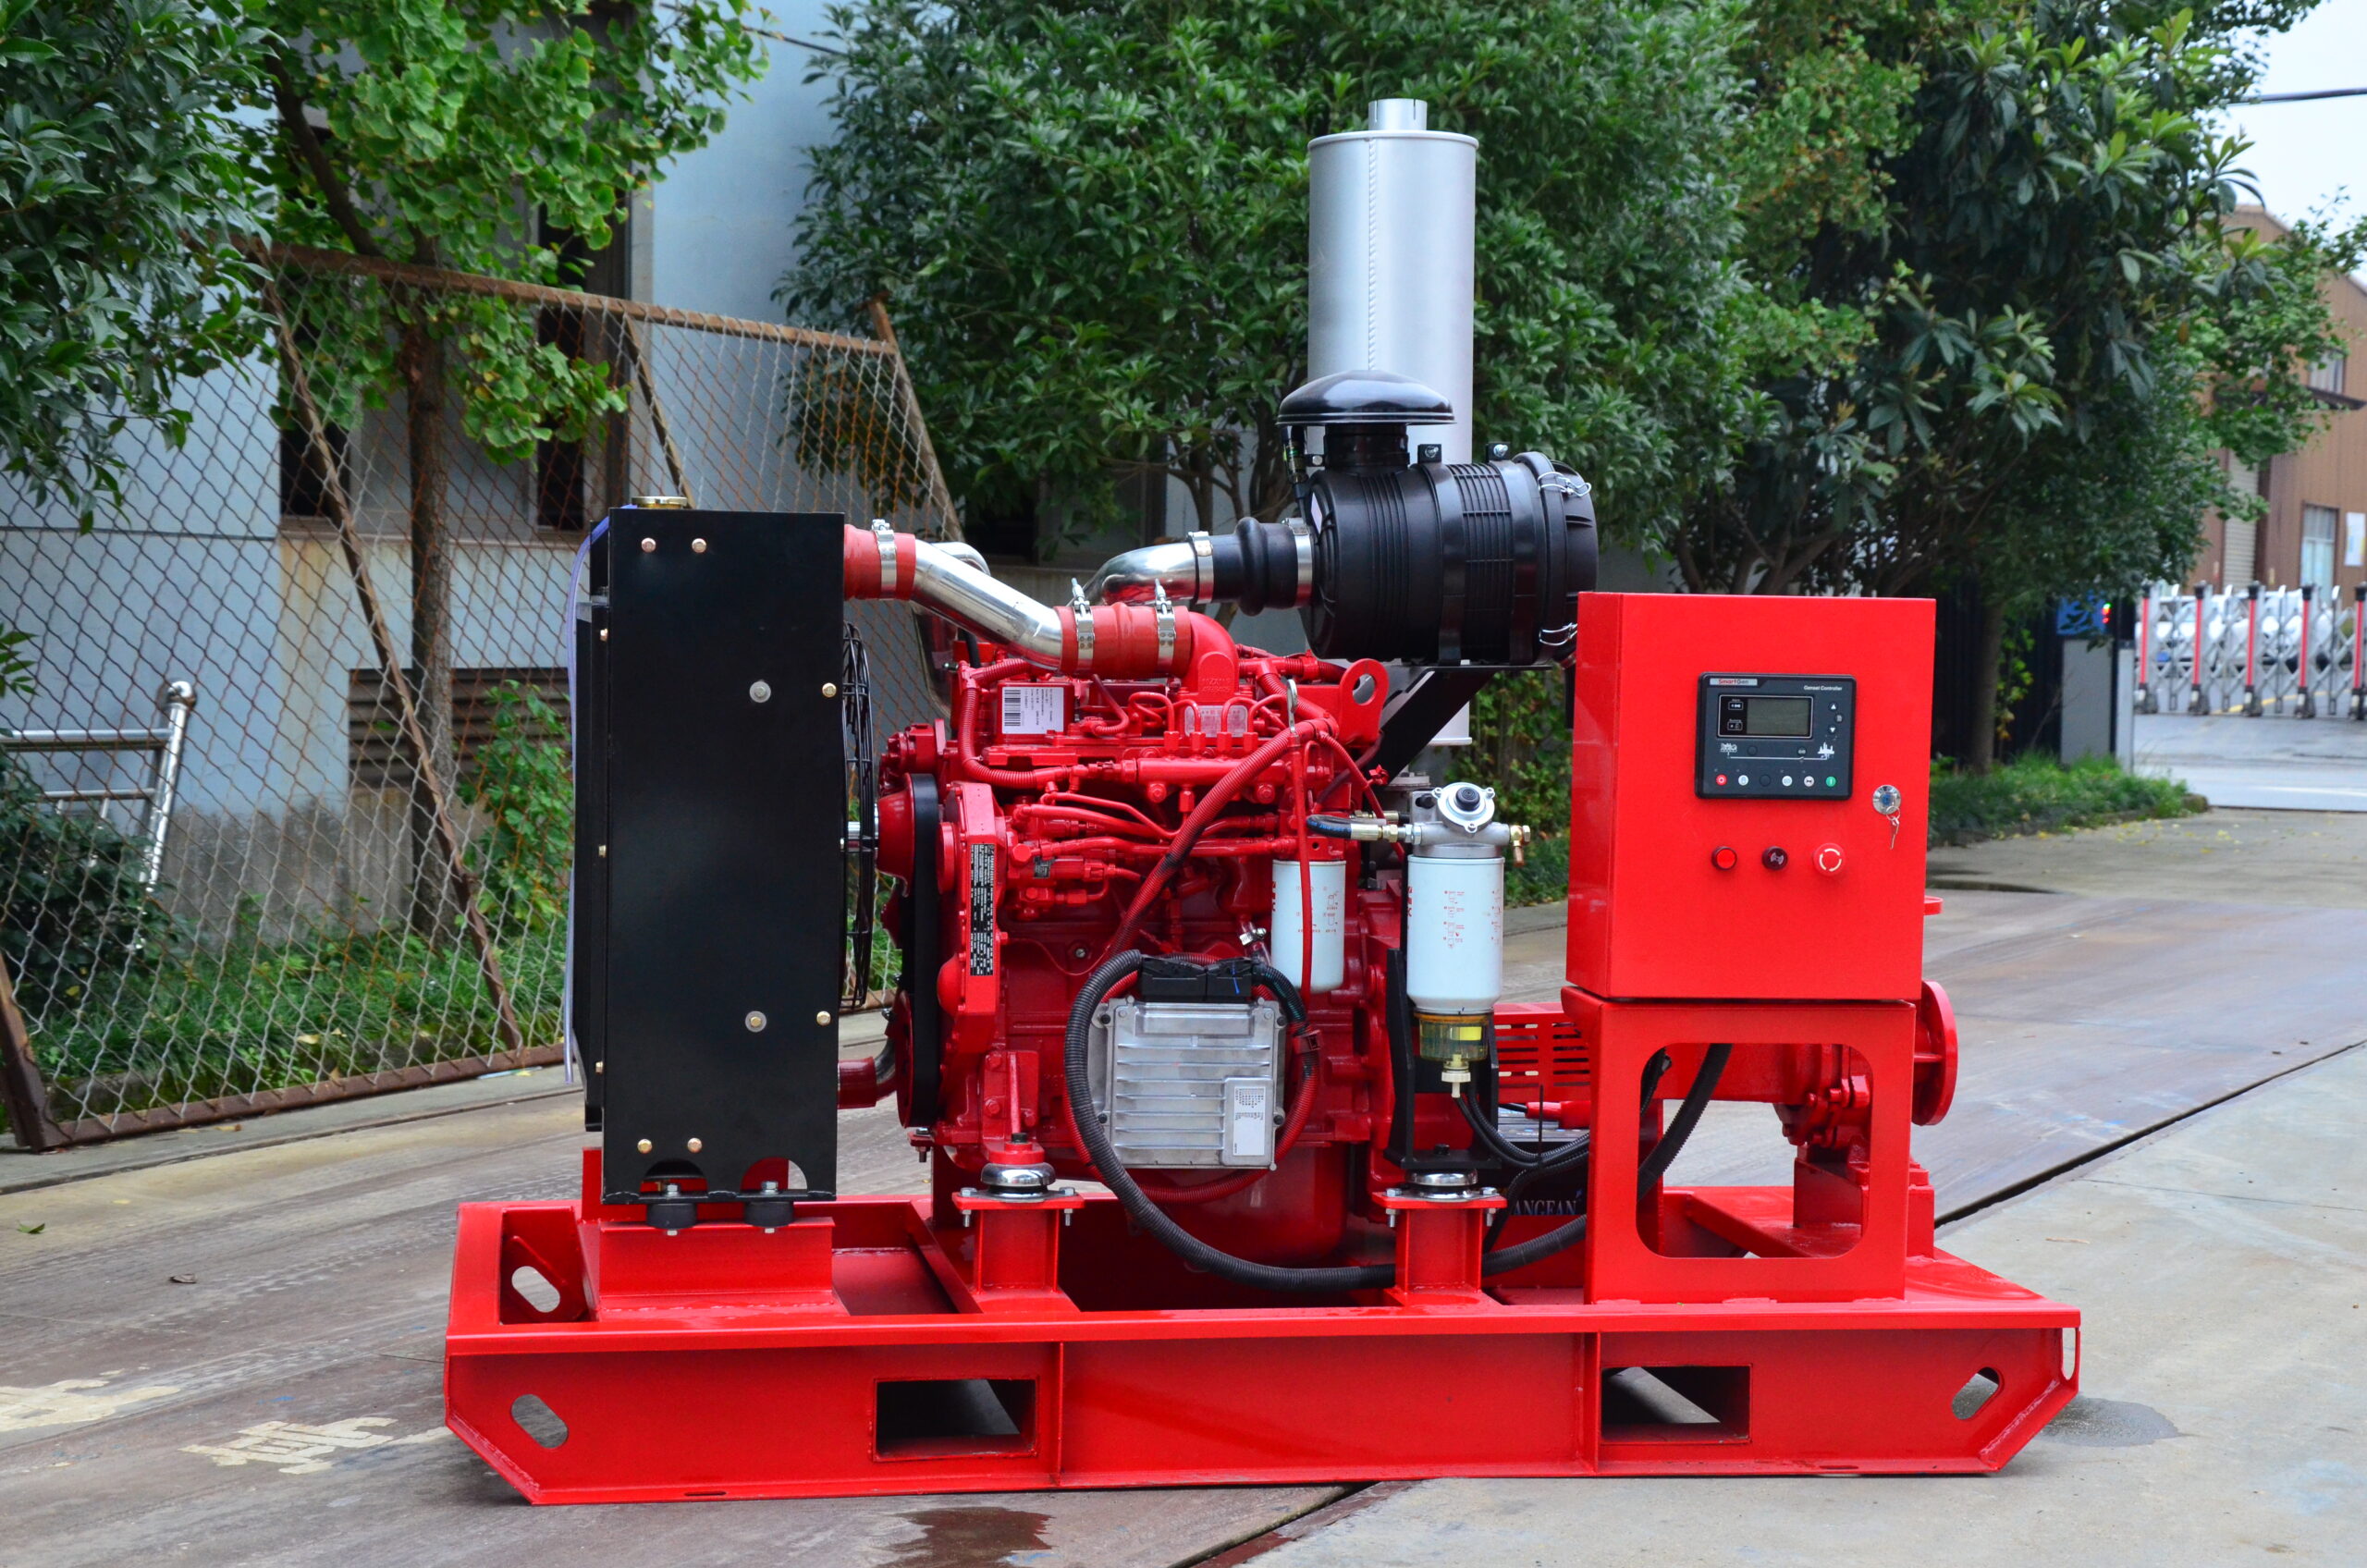 What routine maintenance is required for a fire pump system?